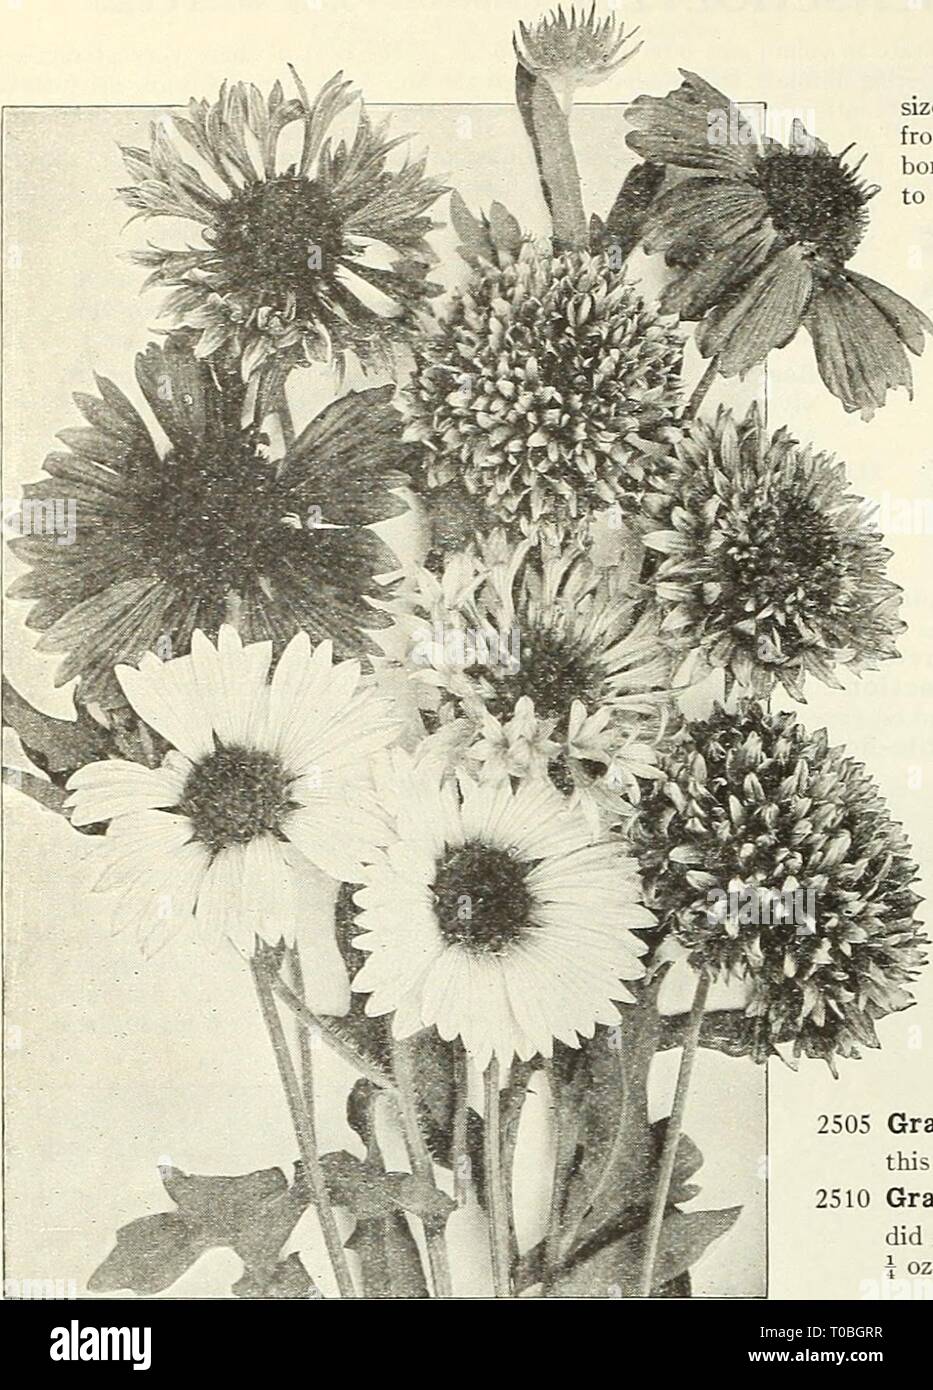 Dreer's garden book 1923 (1923) Dreer's garden book 1923 dreersgardenbook1923henr Year: 1923  88 /flElflyA-DREER; RELIABLE FLOWER SEEDS; i    GAILLARDIA tBlanket Flower) Annual Varieties Splendid showj' annuals, remarkable for the profusion, size and brilliancy of their flowers, continuing in bloom from early summer till November; excellent for beds, borders, or for cutting; should be sown where they are to bloom; ll feet. PER PKT. 2496 Picta. Crimson and orange, j oz., 25 cts..SO 05 2500 Picta Mixed. Single sorts; fine colors. J oz., 25 cts 5  2-198 The Bride. This new double-flowering ^I^B^ Stock Photo